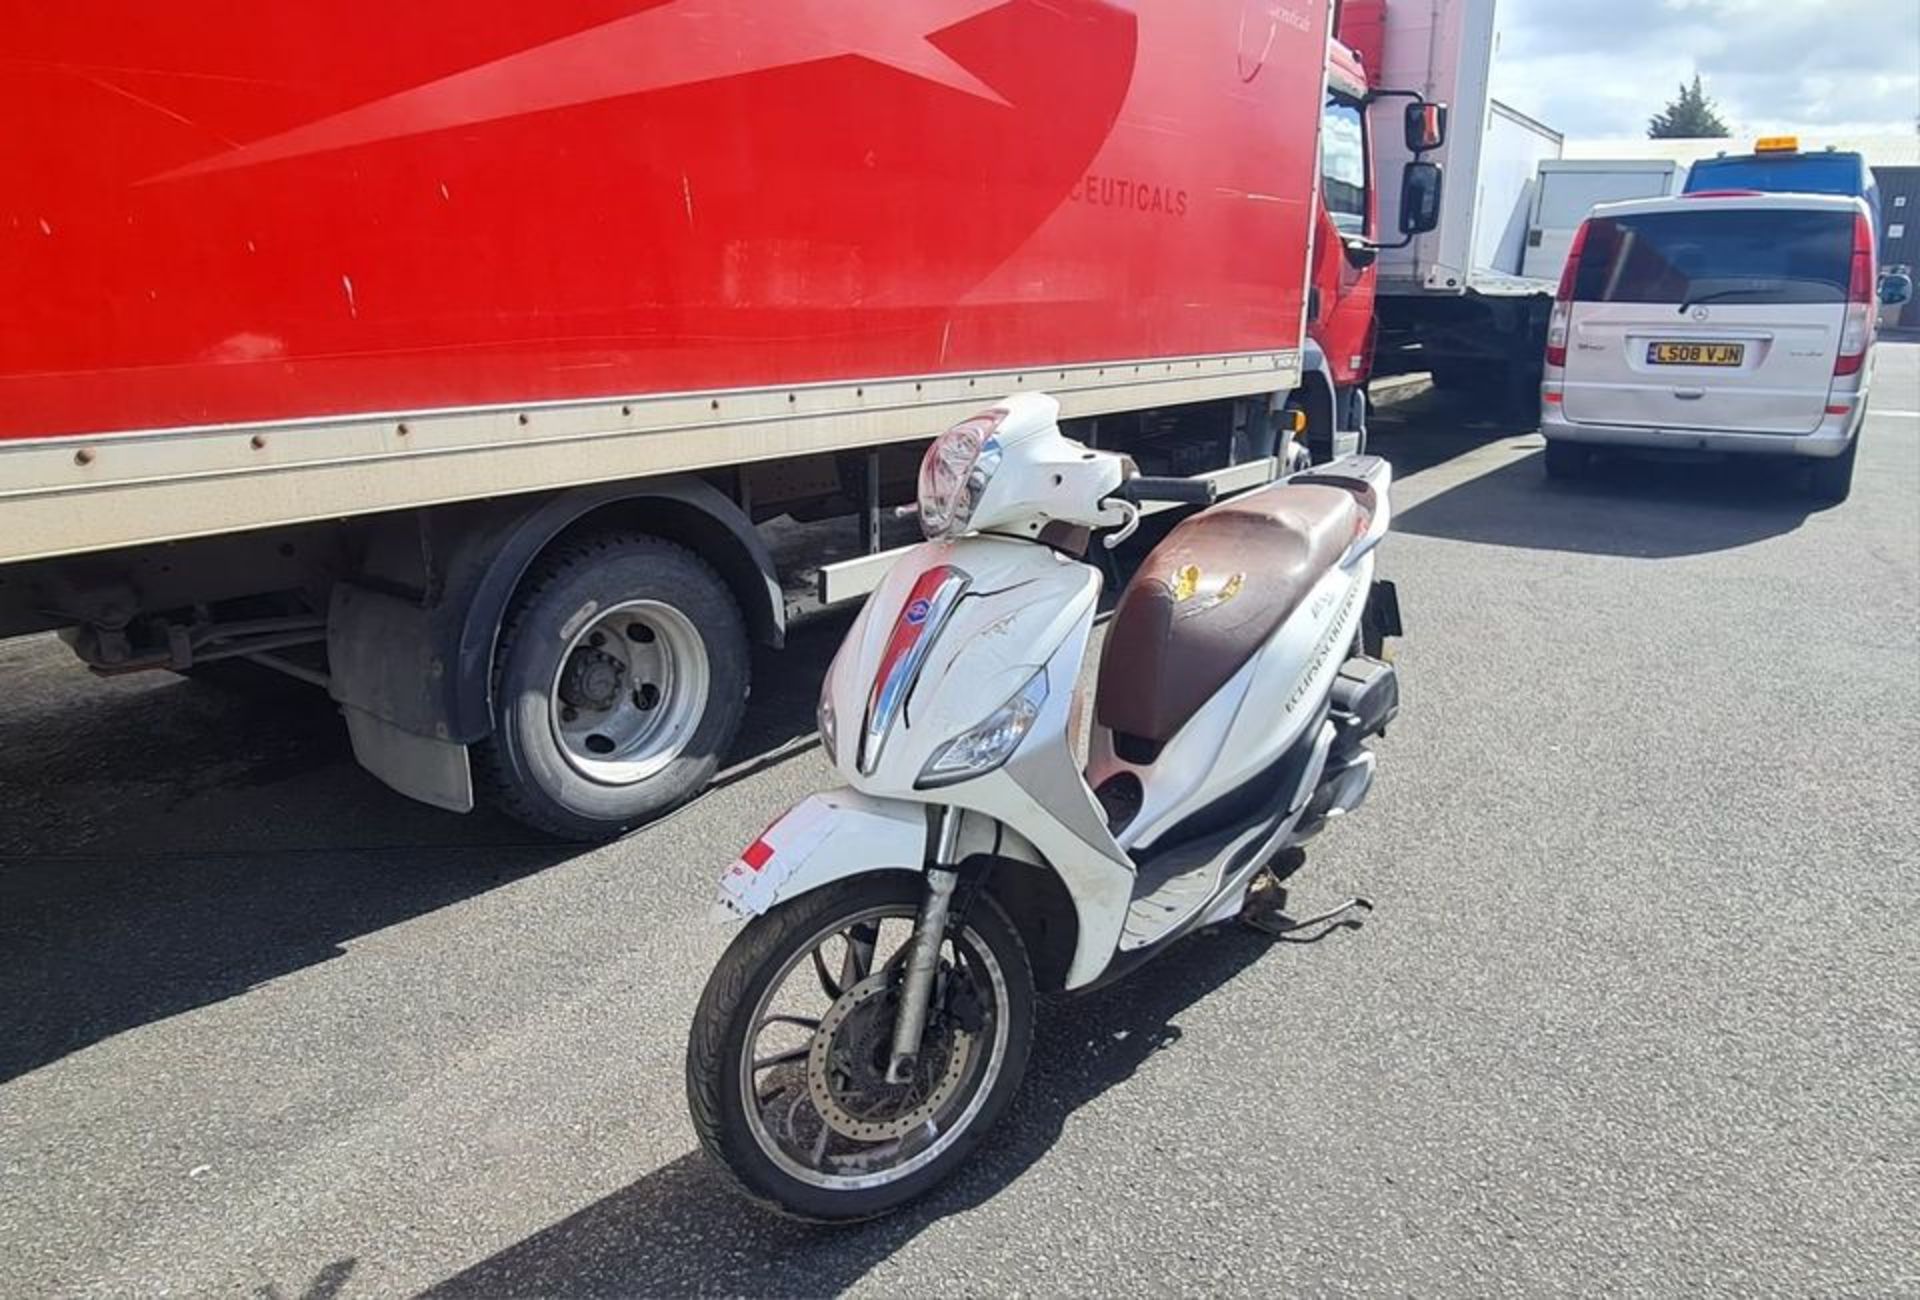 2016 Piaggio Medley 125 Scooter - Missing Key - Image 10 of 13